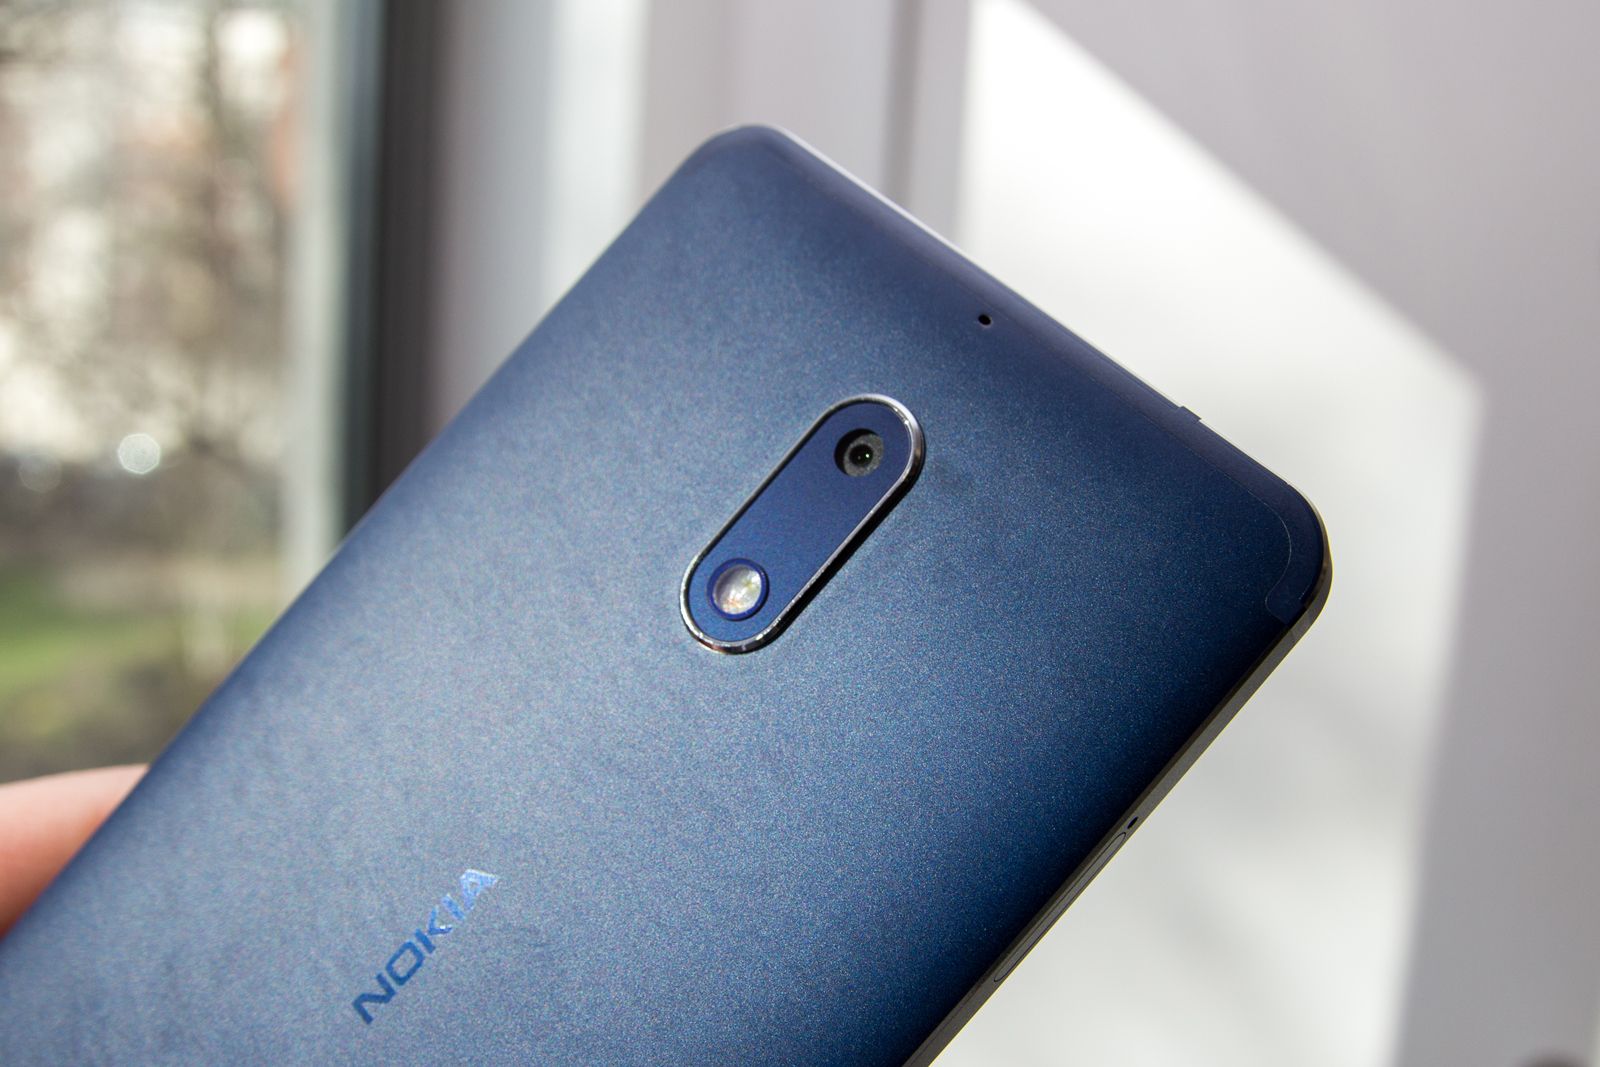 Prime Exclusive deals: $30 off on Nokia 6, LG G6+ to get $50 price